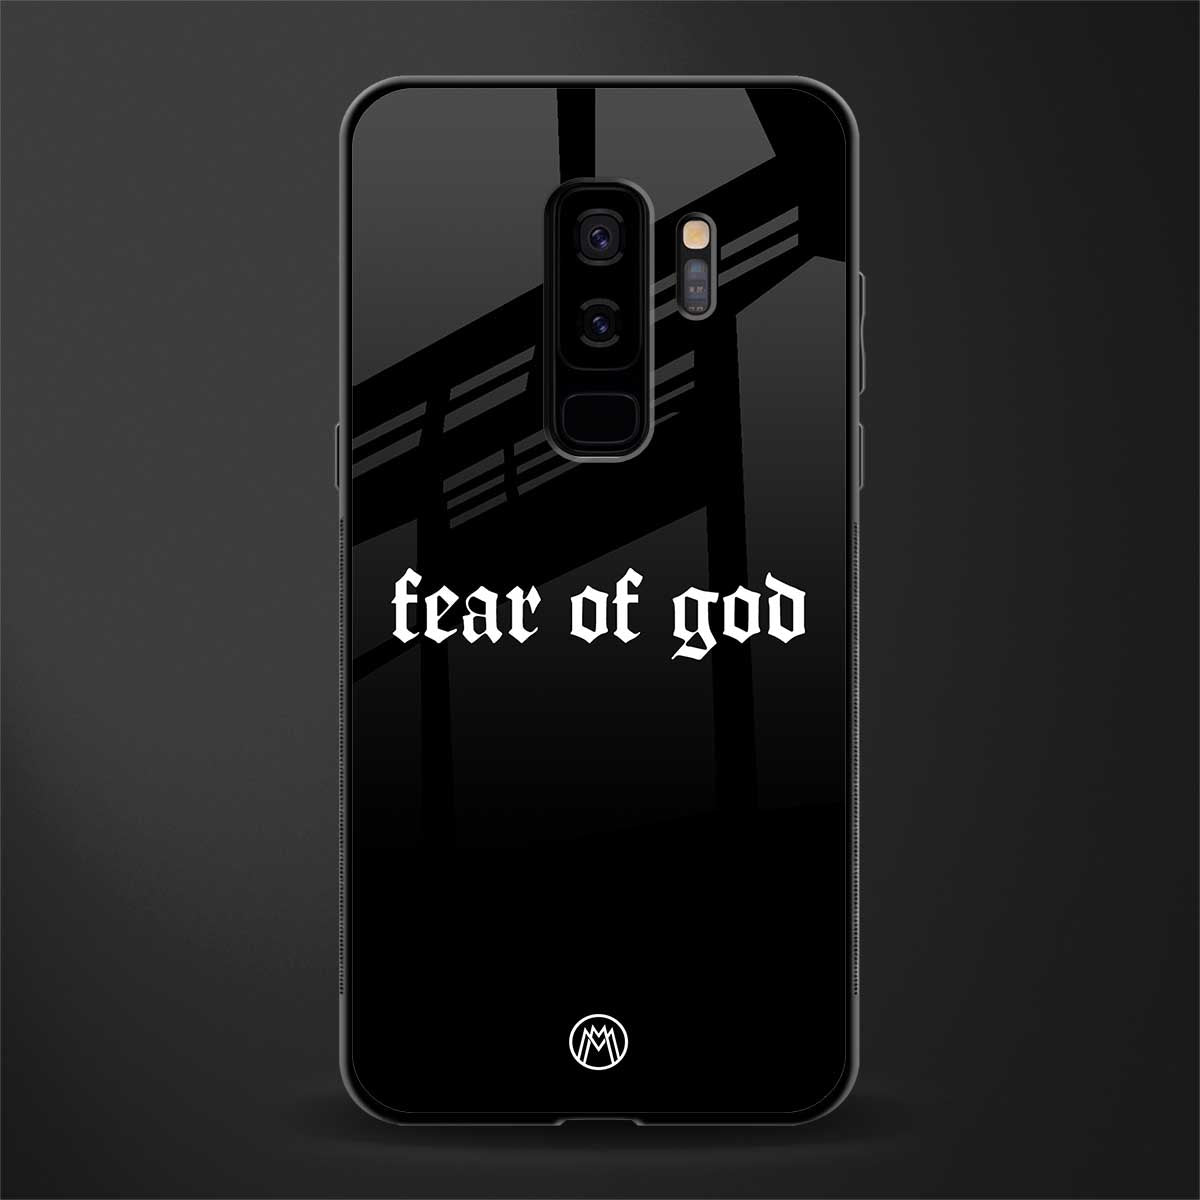 fear of god phone cover for samsung galaxy s9 plus